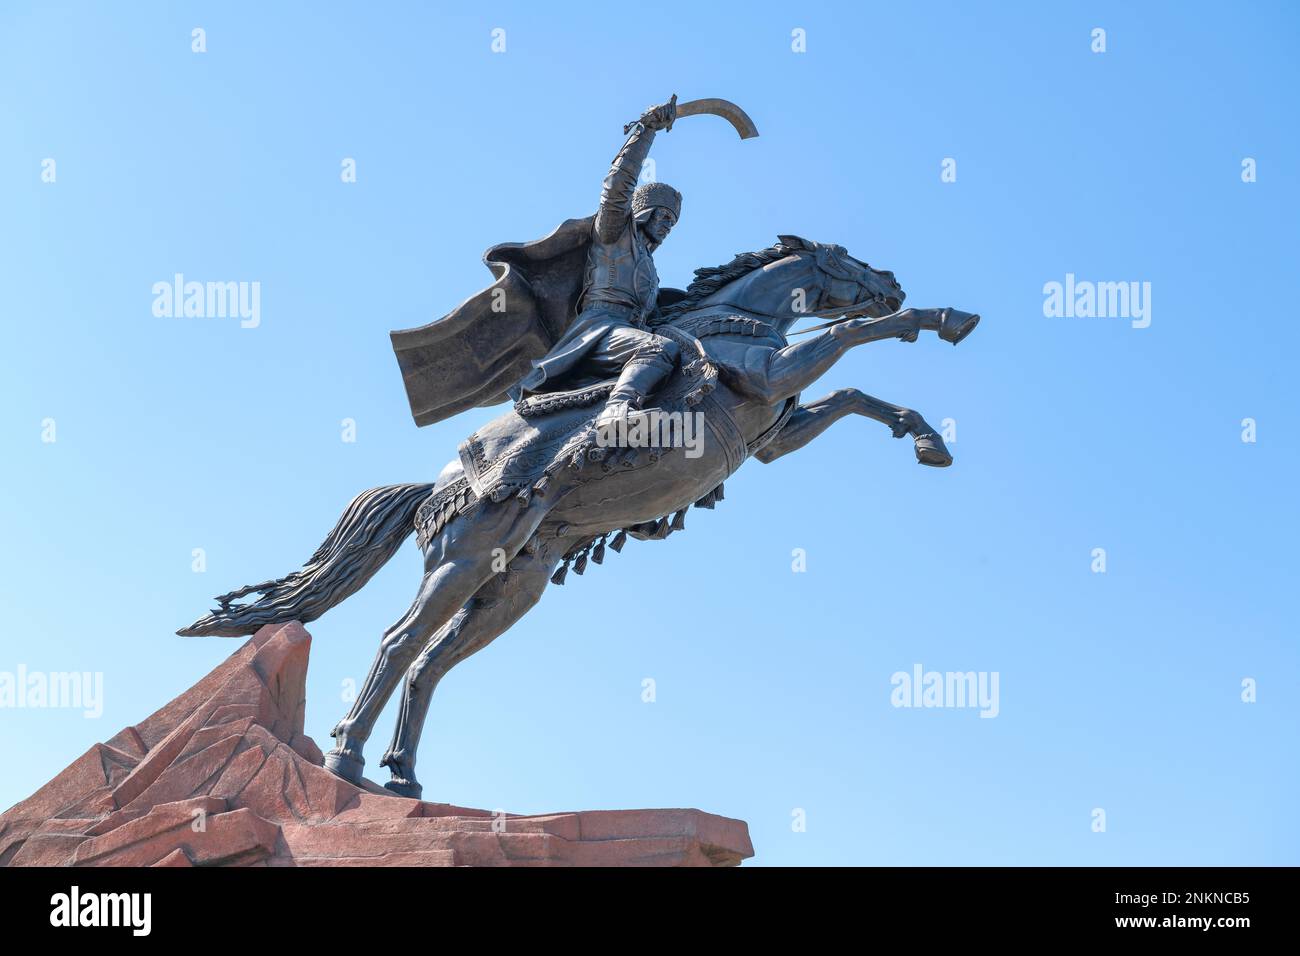 URGENCH, UZBEKISTAN - SEPTEMBER 07, 2022: Monument to the ruler and commander Jalal ad-Din Manguberdy against the background of a blue cloudless sky Stock Photo